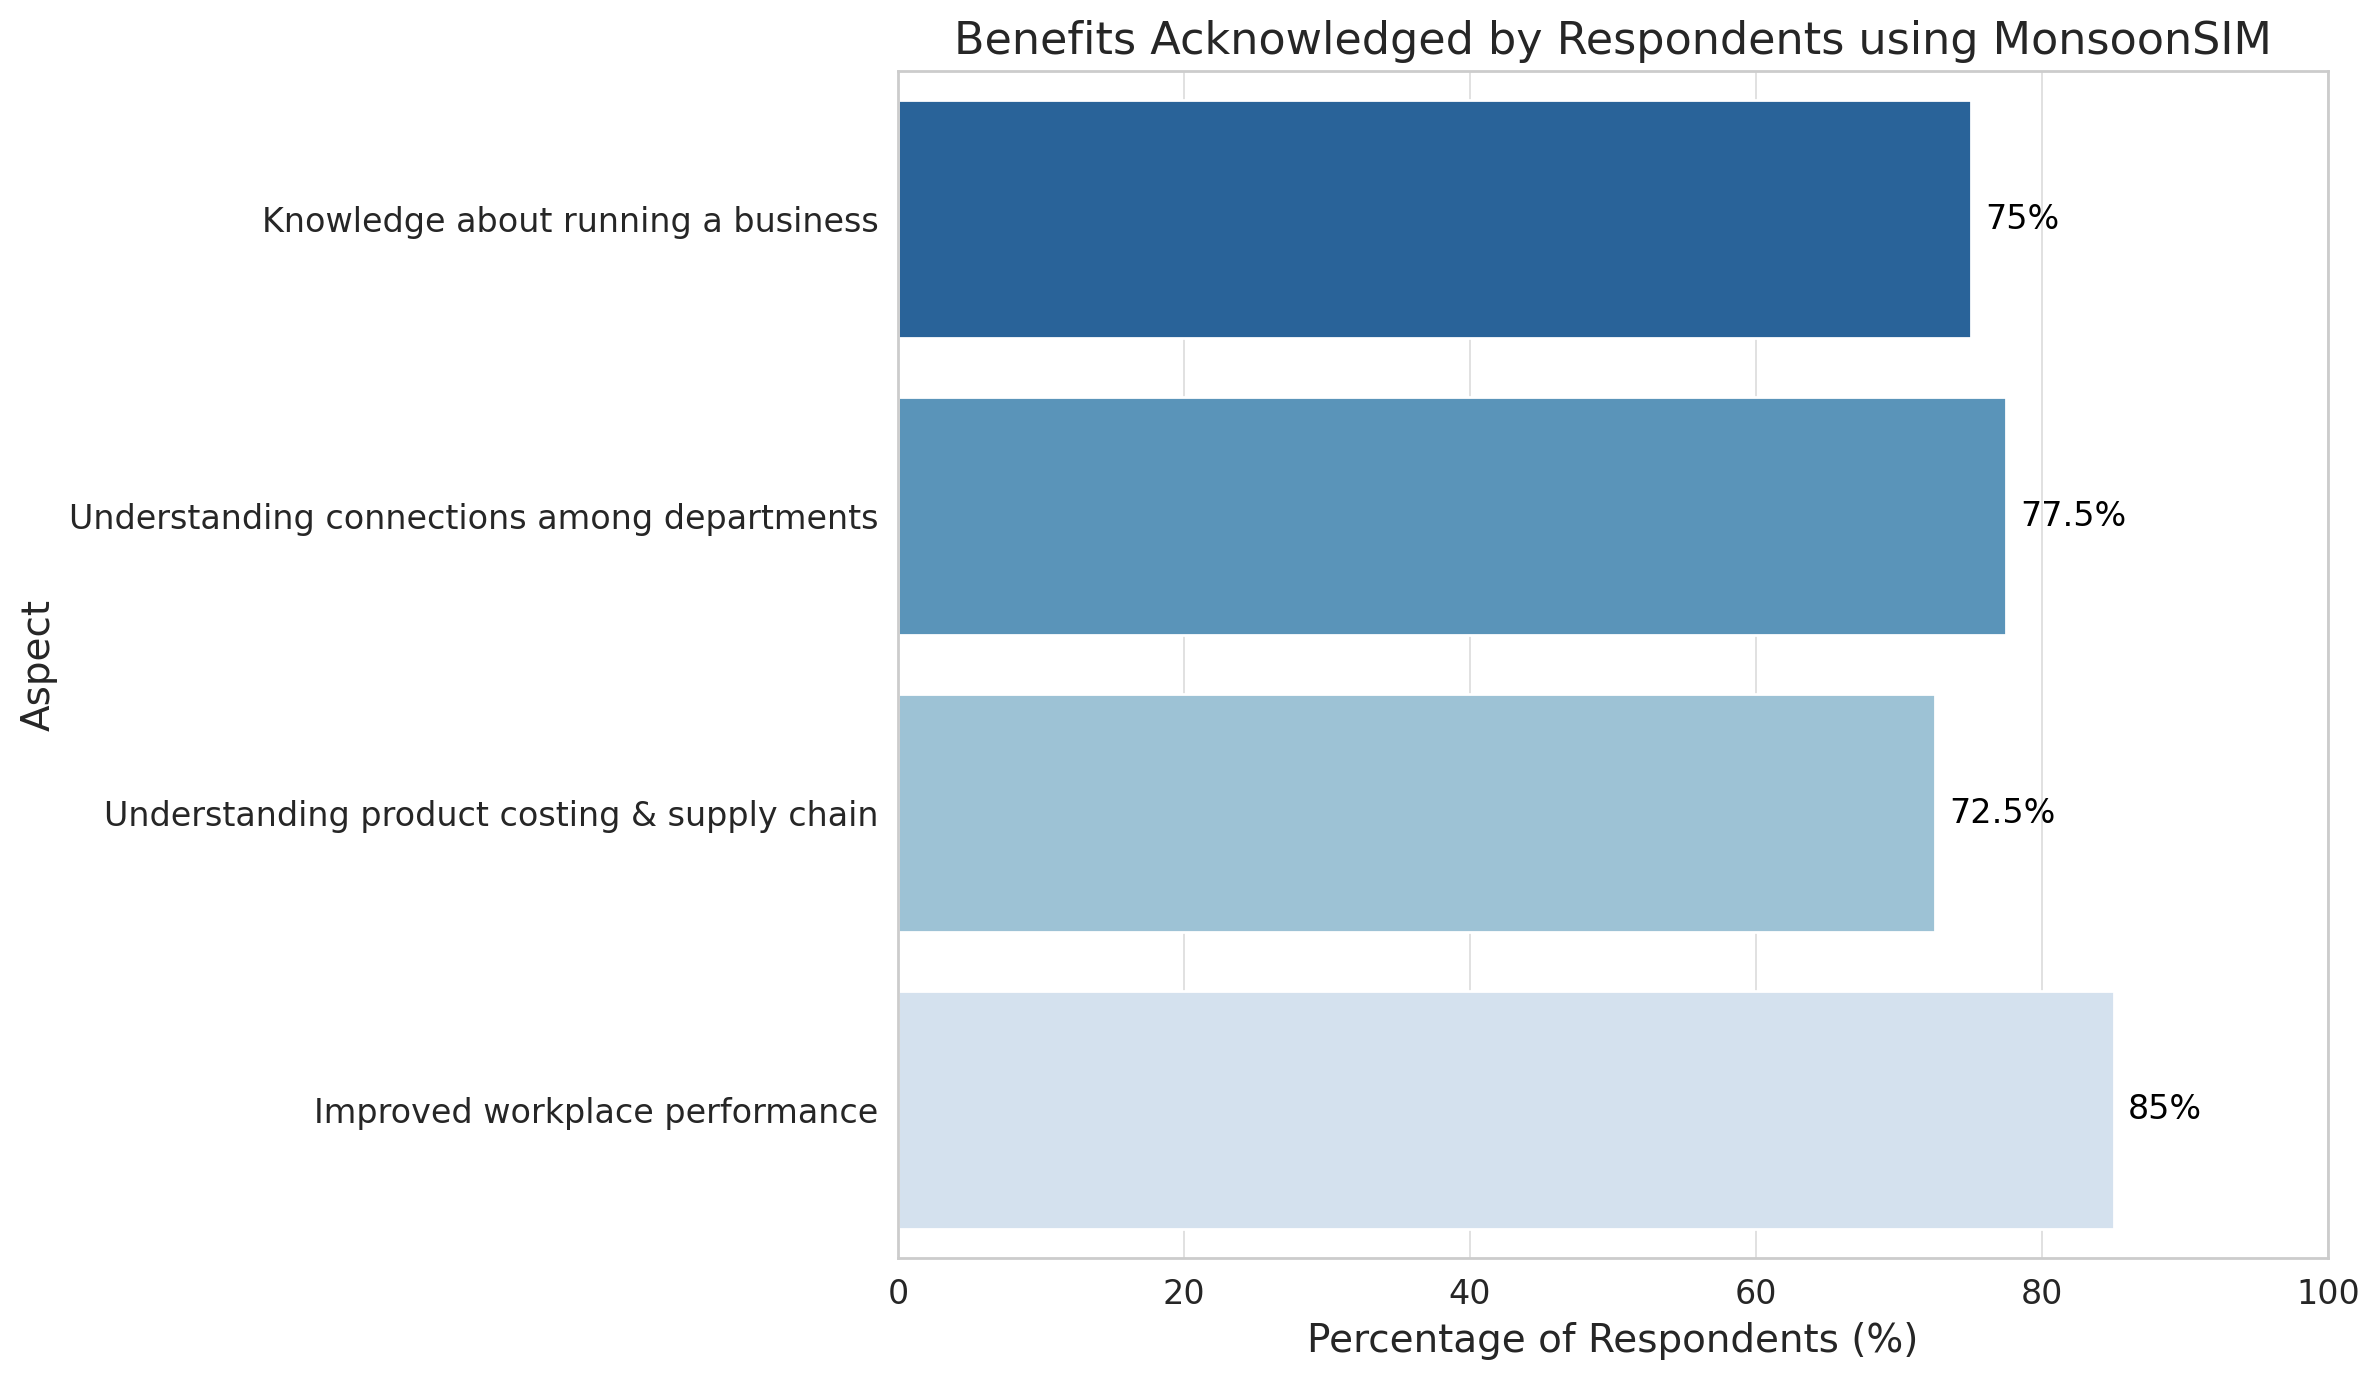 Benefits Acknowledged by Respondents using MonsoonSIM' with four categories on the Y-axis: 'Knowledge about running a business,' 'Understanding connections among departments,' 'Understanding product costing & supply chain,' and 'Improved workplace performance.' The X-axis shows the percentage of respondents, ranging from 0 to 100%. The bars represent the percentage of respondents acknowledging each benefit: 75% for knowledge about running a business, 77.5% for understanding department connections, 72.5% for understanding product costing and supply chain, and 85% for improved workplace performance, indicating high recognition of MonsoonSIM's impact across these areas.